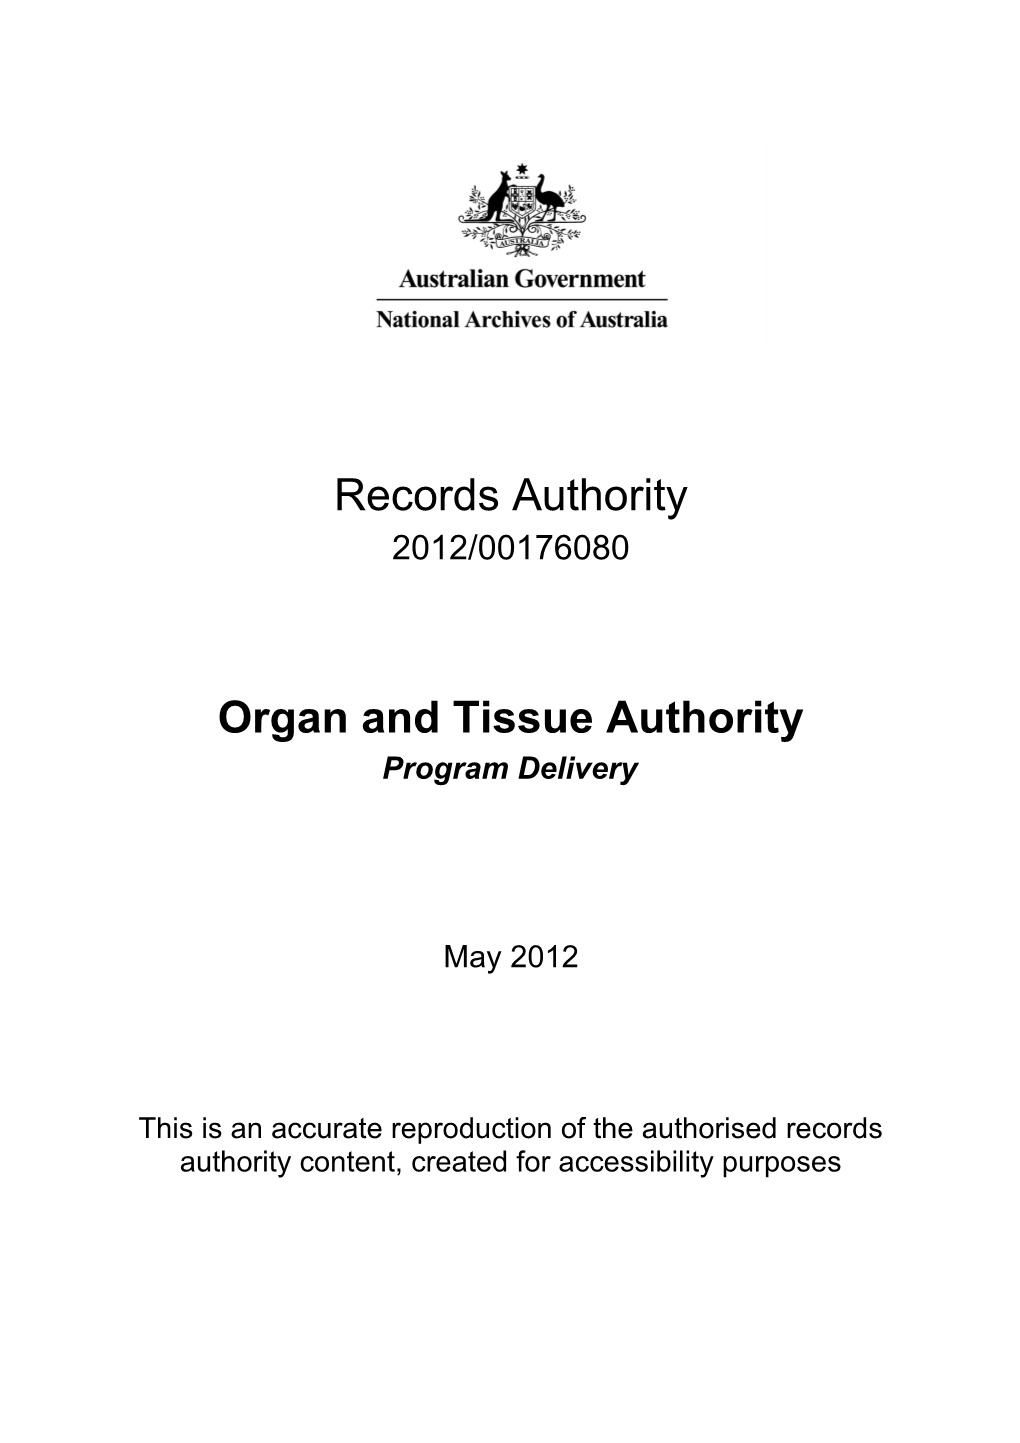 Organ and Tissue Authority 2012/00176080